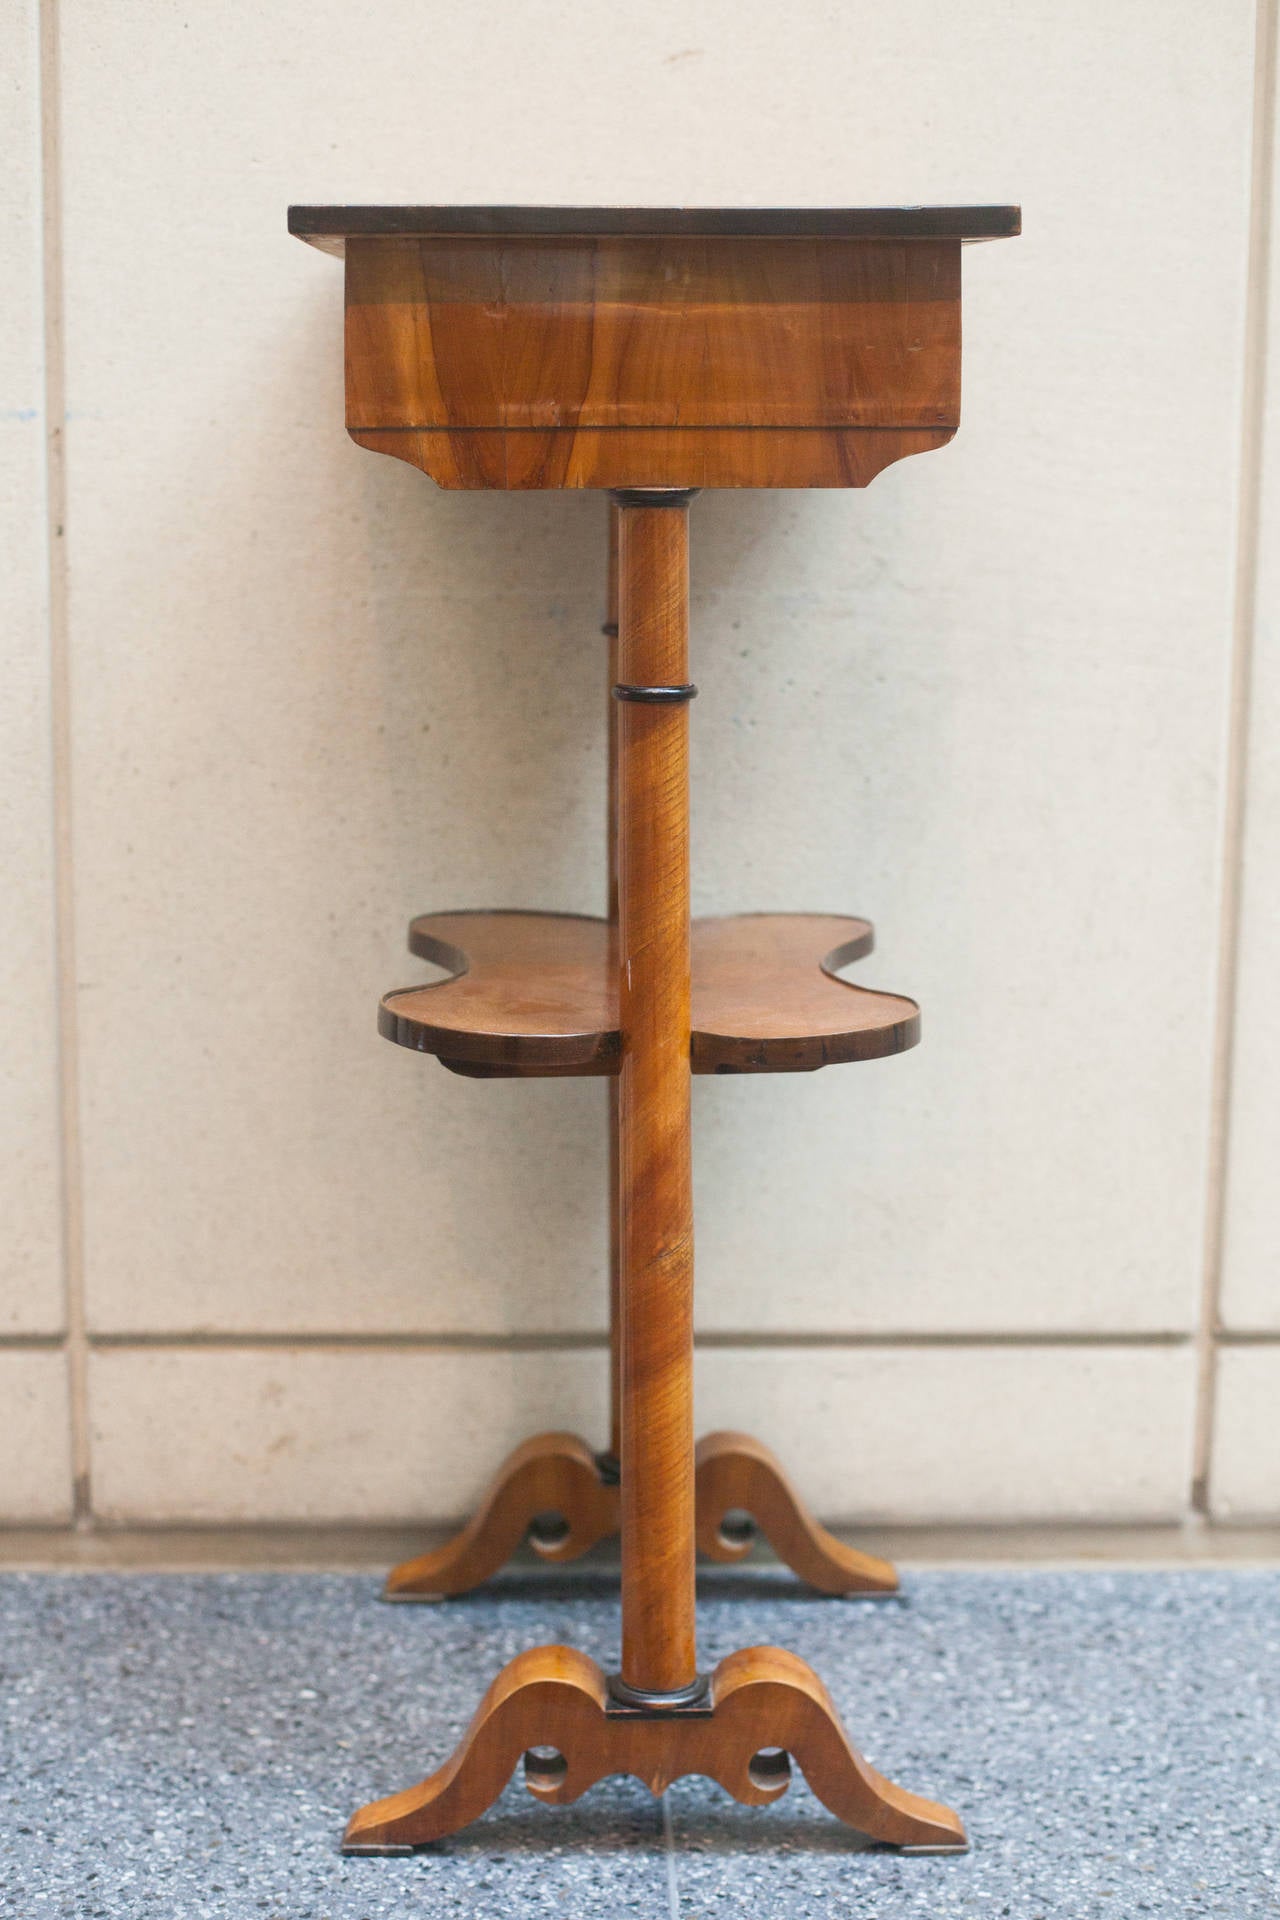 Austrian walnut Biedermeier sewing table with ebonized trim and one drawer below. The two columnar legs are supported by a shelf and a stretcher below terminating on downswept feet.